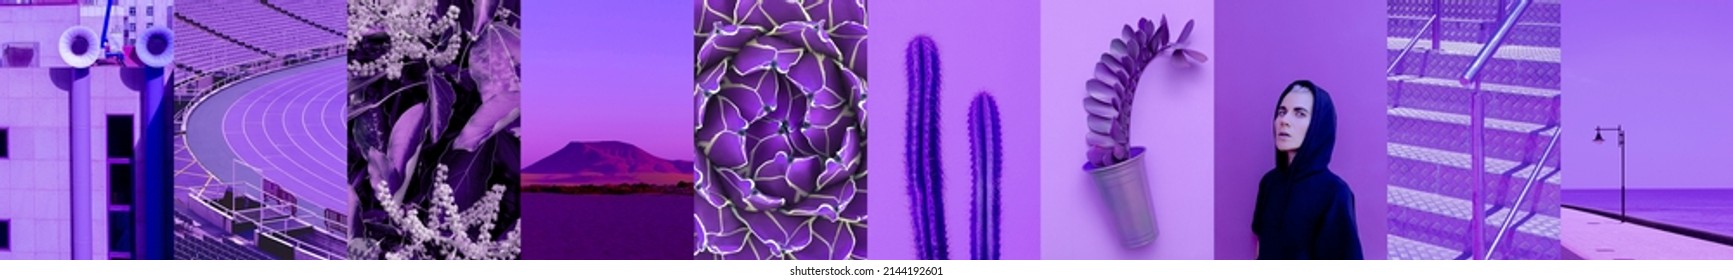 Set of trendy aesthetic photo collages. Minimalistic images of one top color. Purple mood board - Shutterstock ID 2144192601